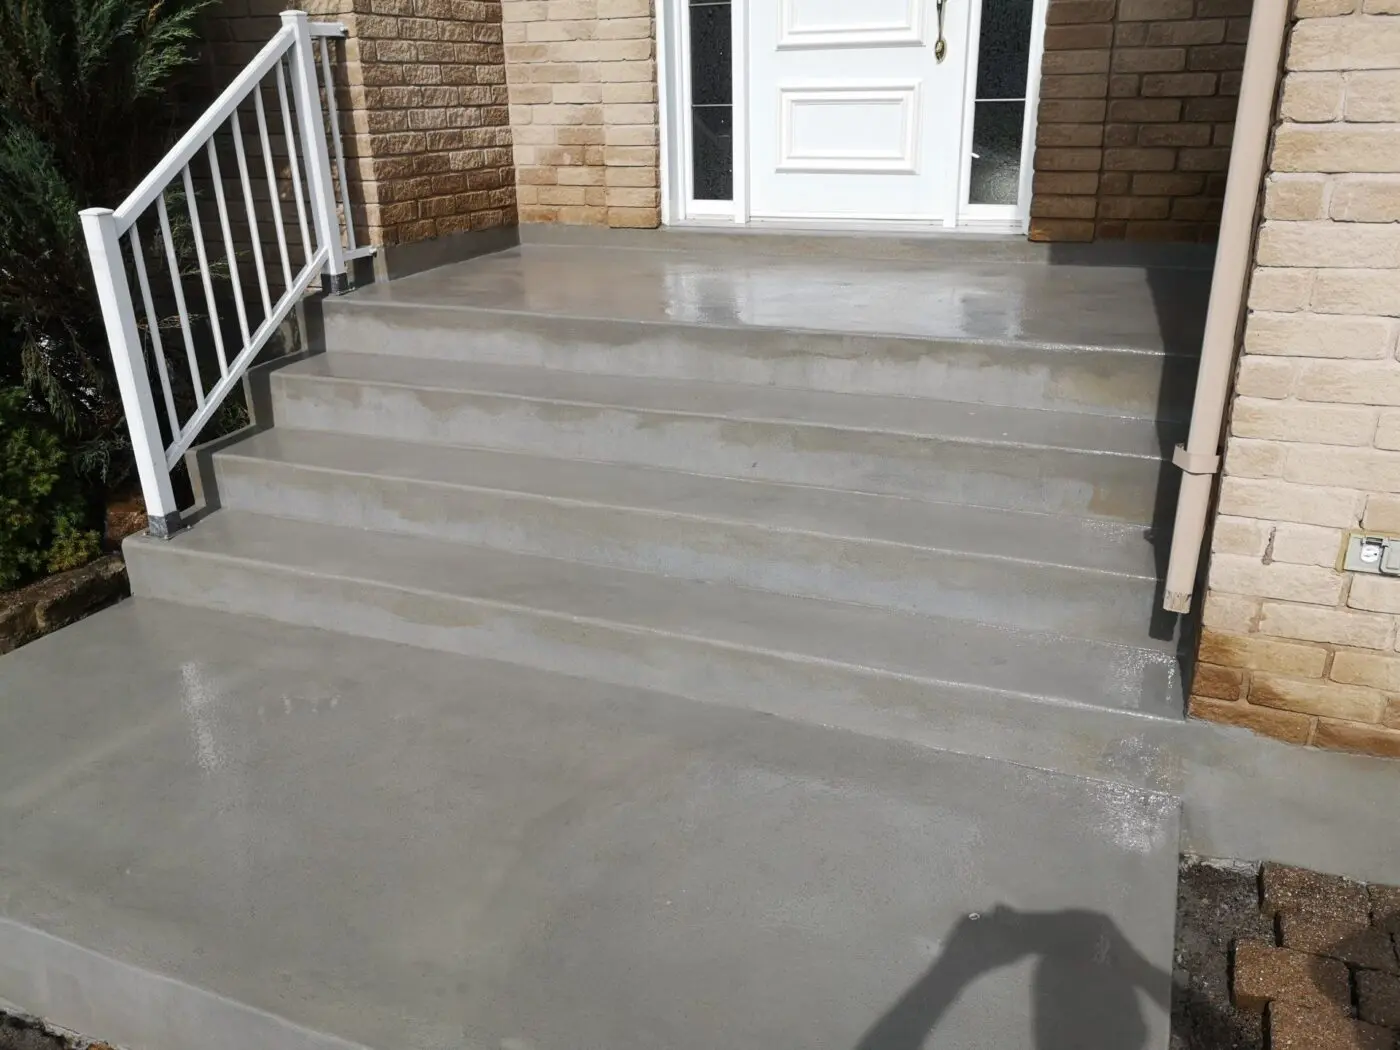 A set of wide concrete steps, crafted by an affordable concrete contractor, leads up to a white-paneled front door of the brick house. The steps have a smooth finish and are flanked by white railings on the left side. A shadow of a person taking the photo is visible in the foreground.